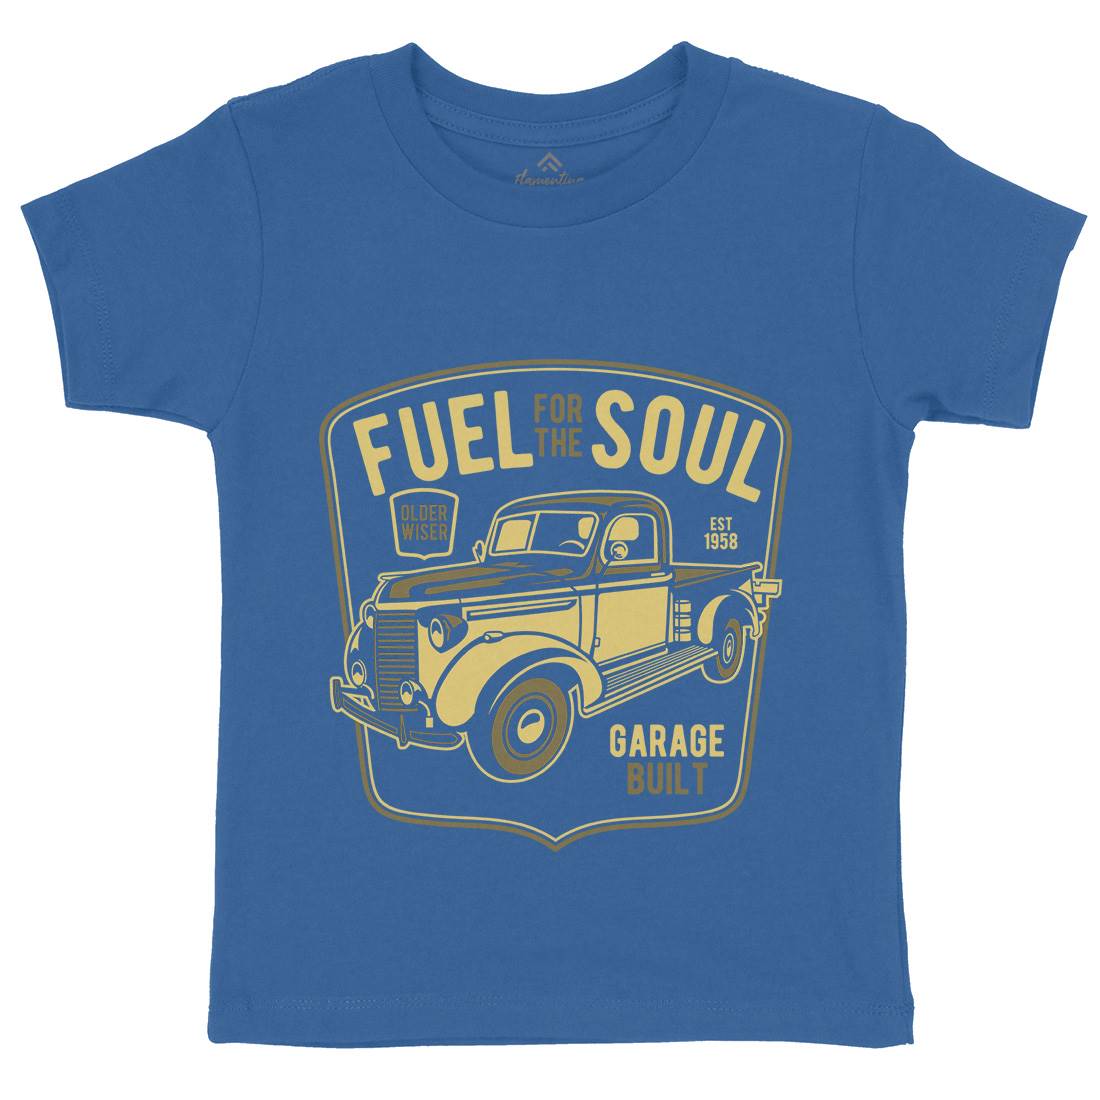 Fuel For The Soul Kids Crew Neck T-Shirt Cars B213